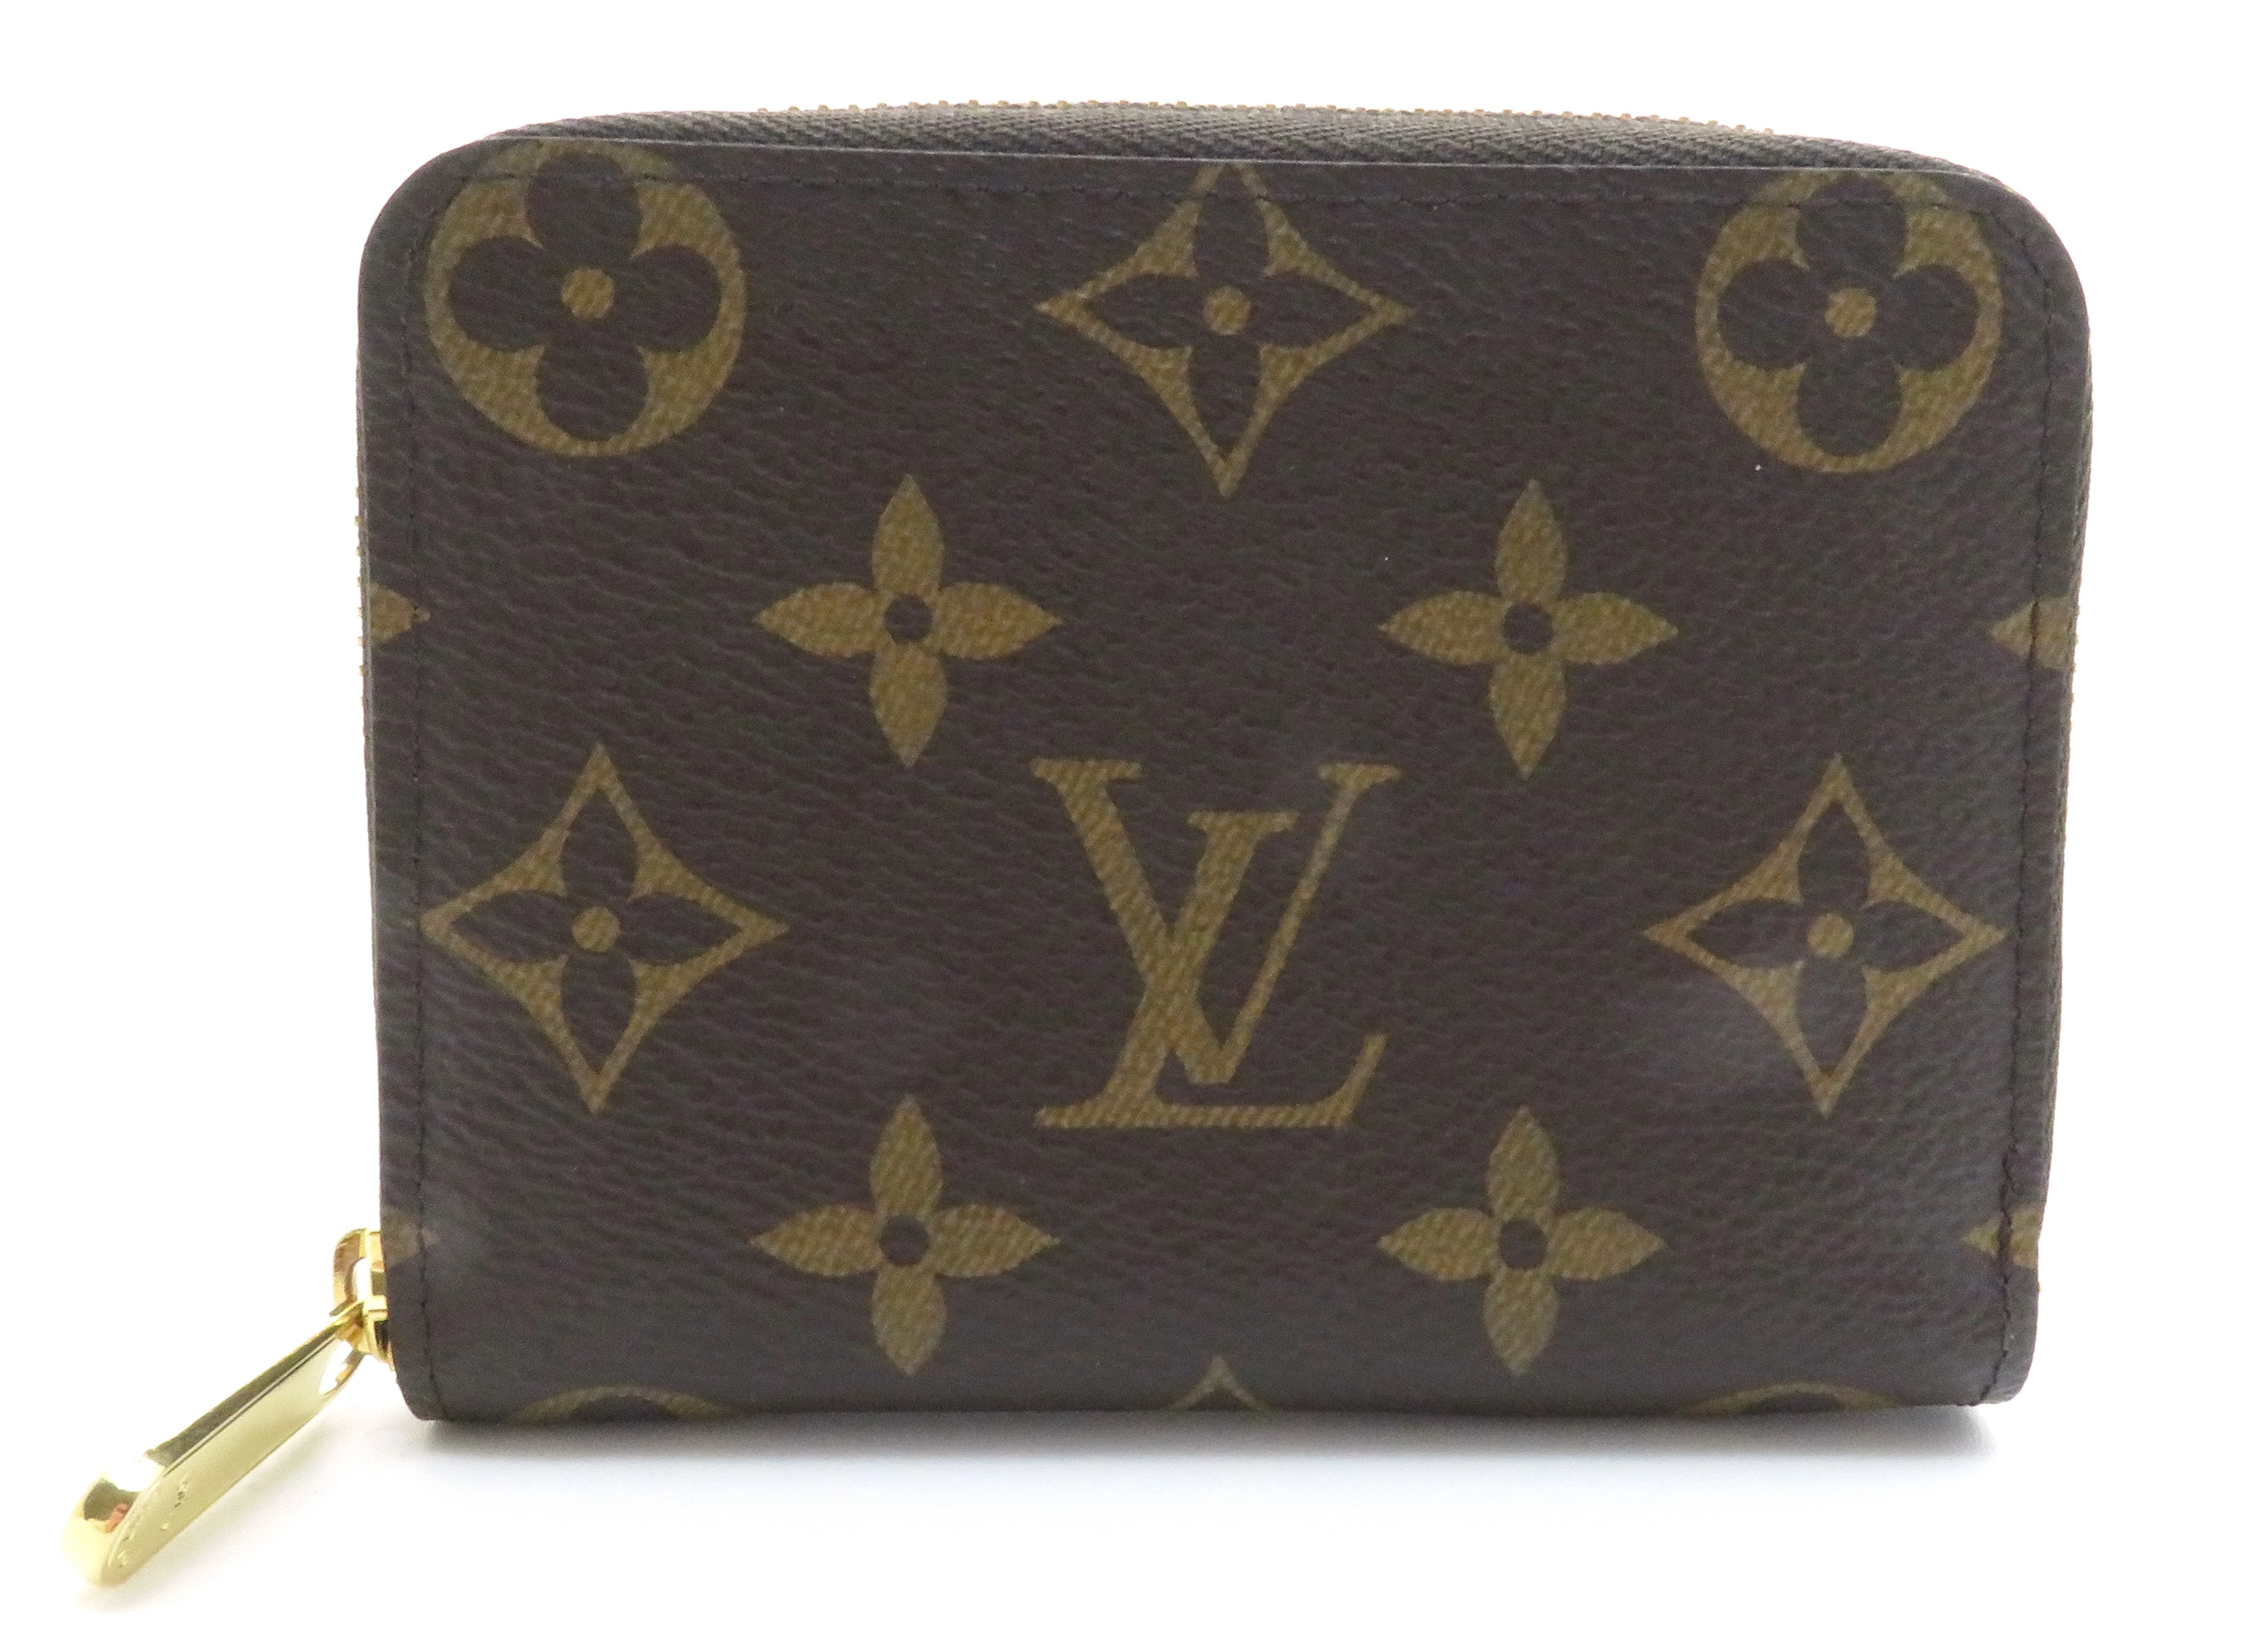 LOUIS VUITTON ルイヴィトン ジッピー・コインパース M60067